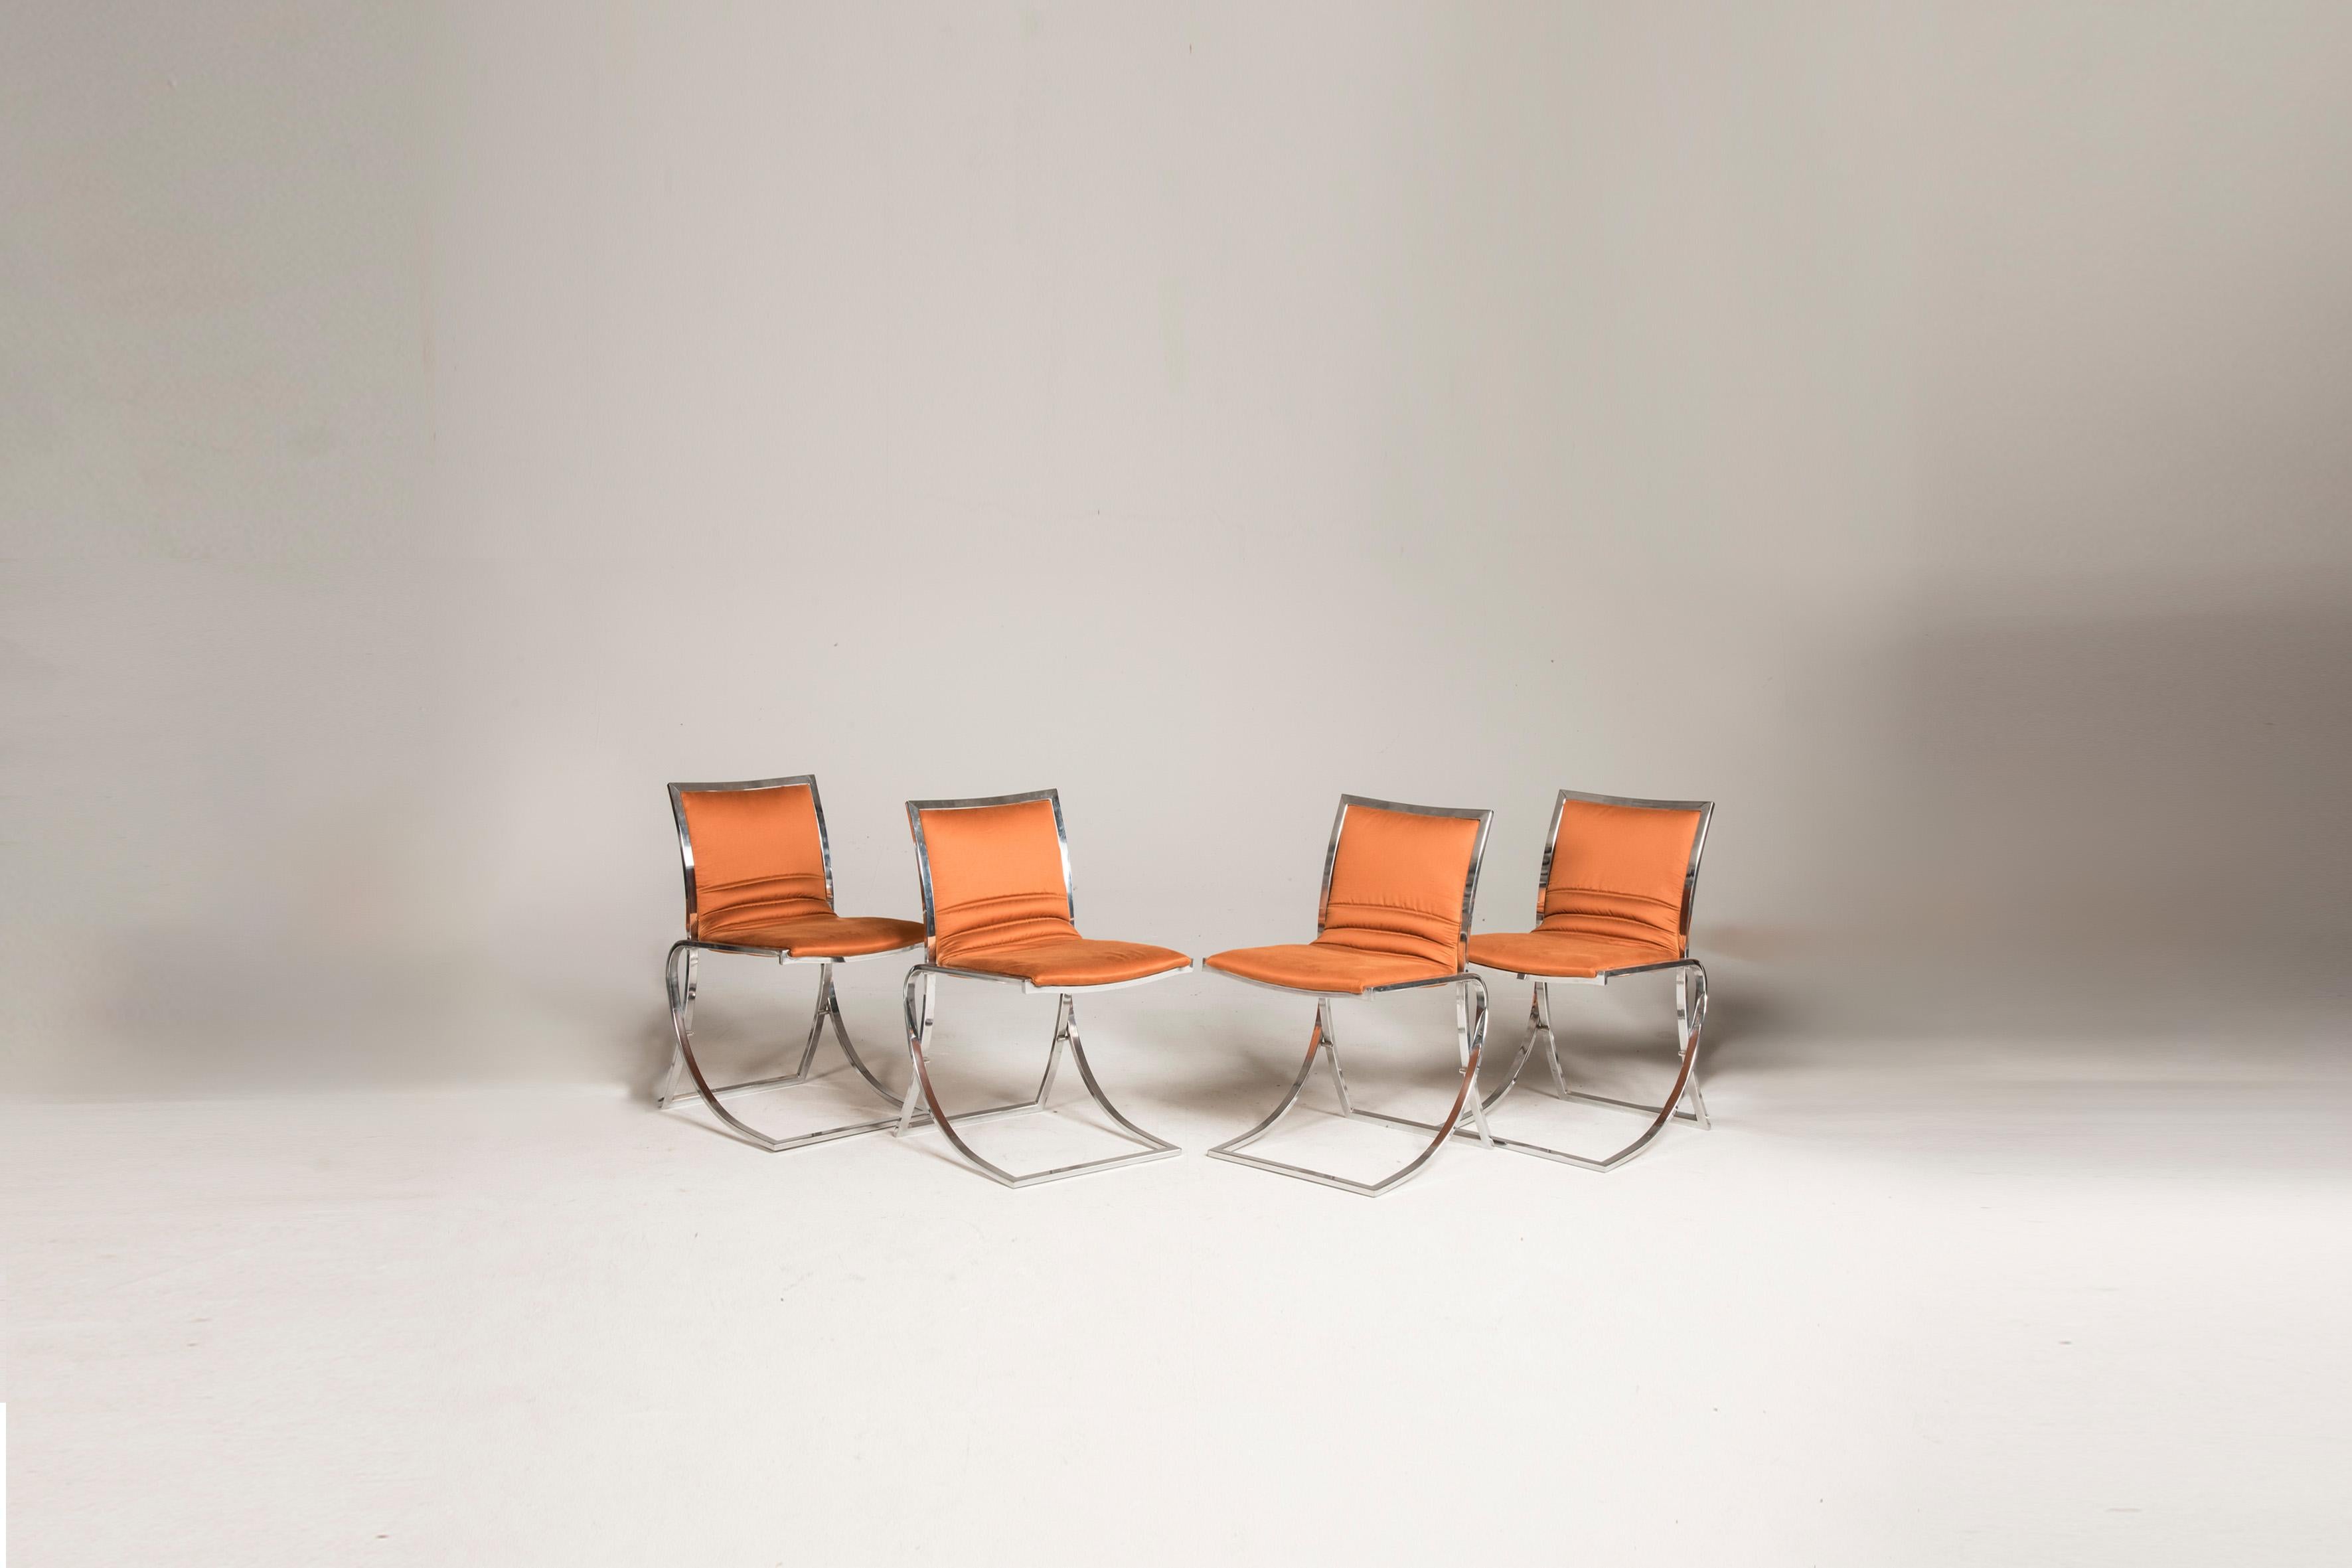 Set of 4 chairs with chromed steel structure and recently orange reupholstered seats.

size of each chair: d 54 cm w 45 cm h 76 cm

From 1970s period

Conditions: very good, only small wears coherent with age and prior use on the chromed steel